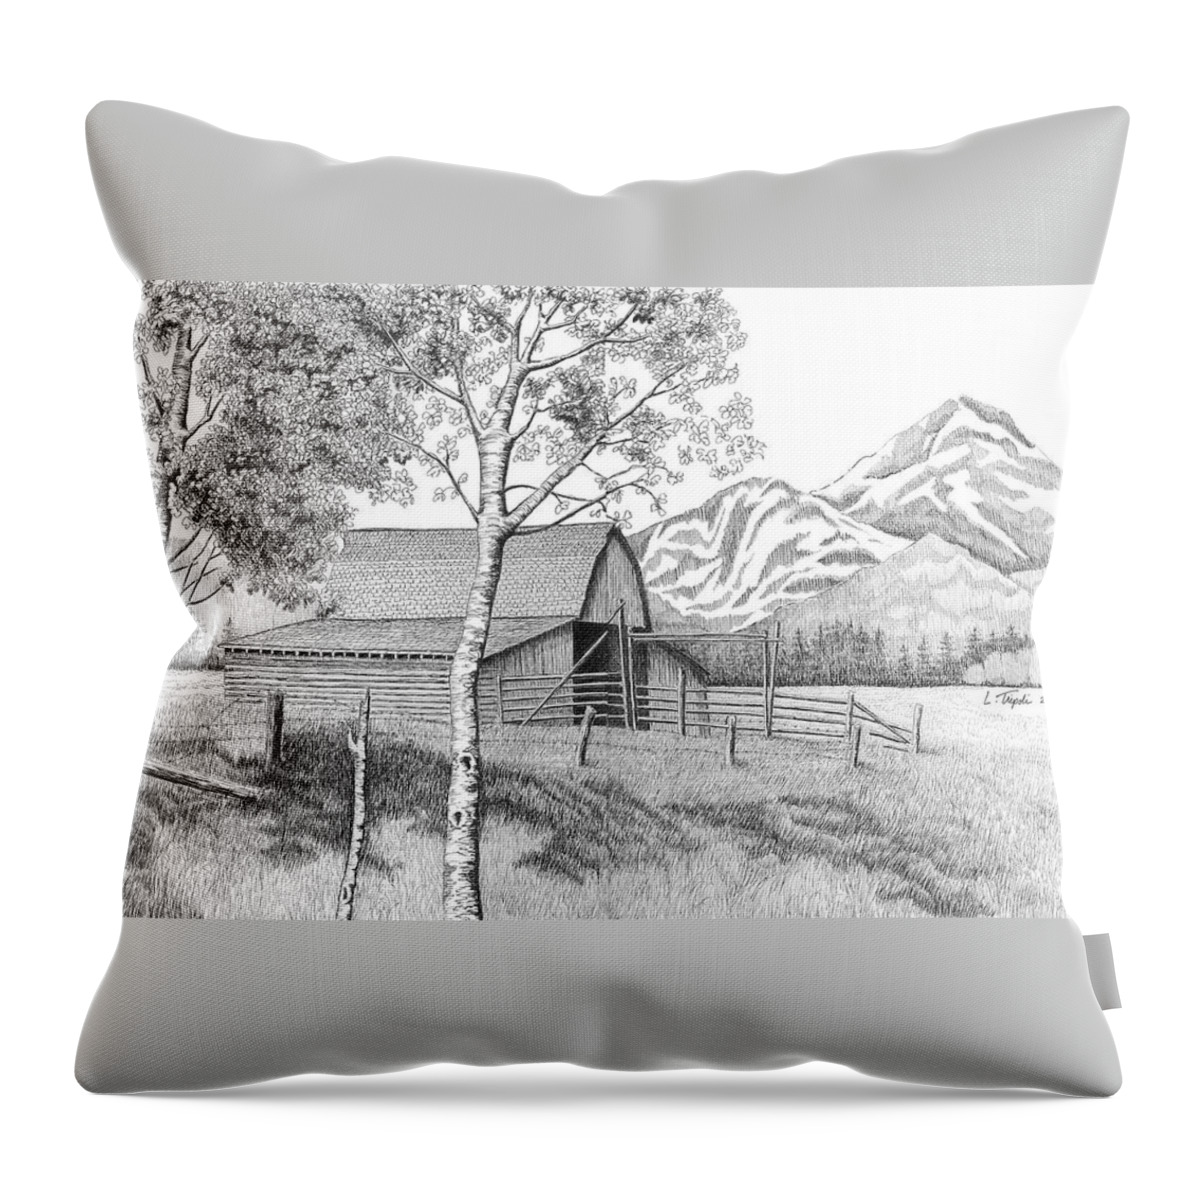 Landscape Throw Pillow featuring the drawing Mountain Pastoral by Lawrence Tripoli